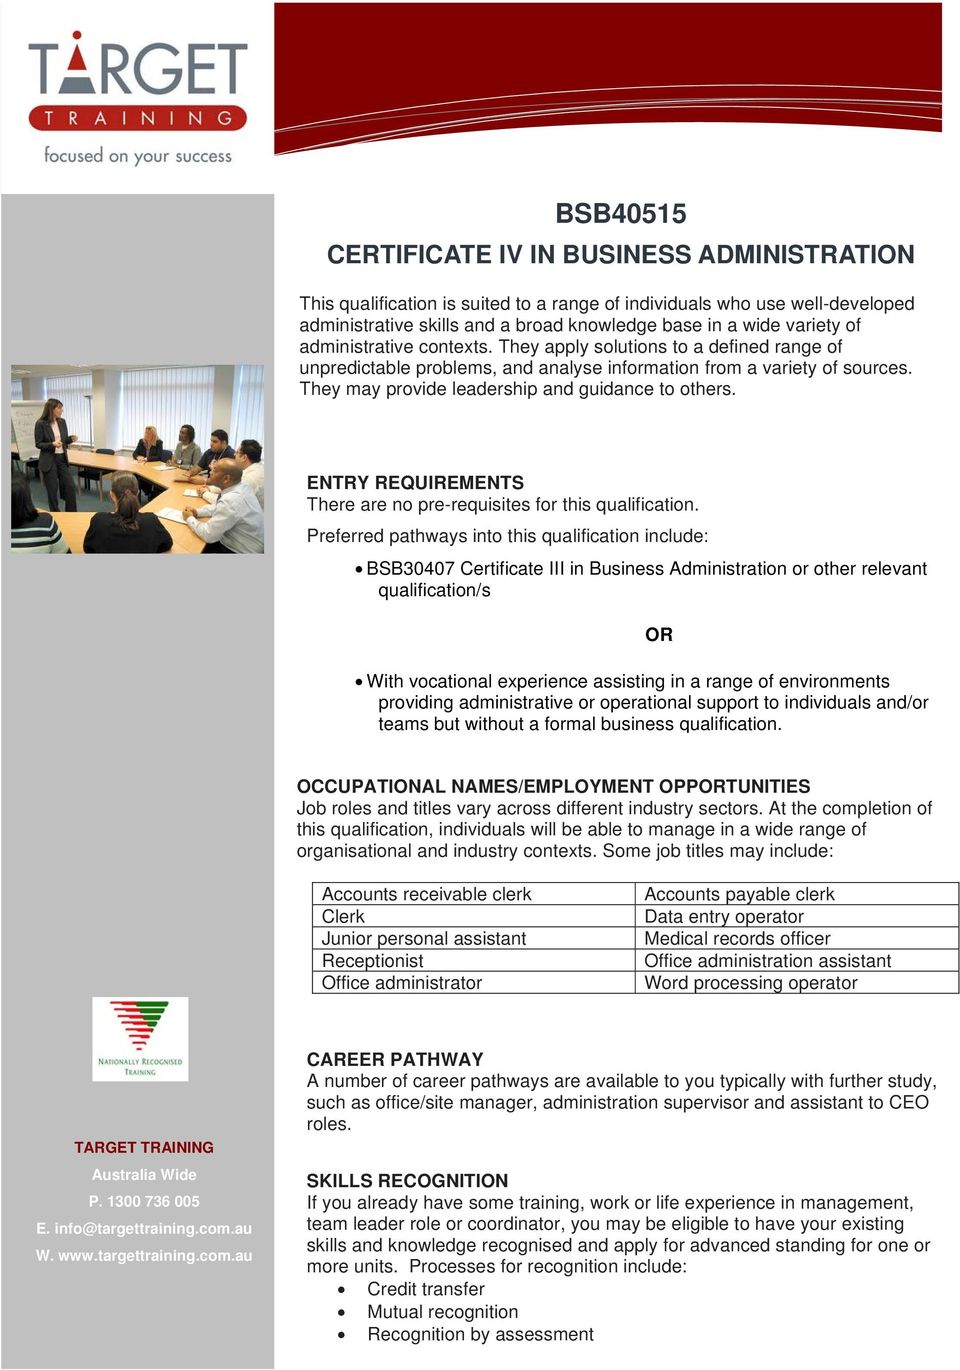 ENTRY REQUIREMENTS There are no pre-requisites for this qualification.